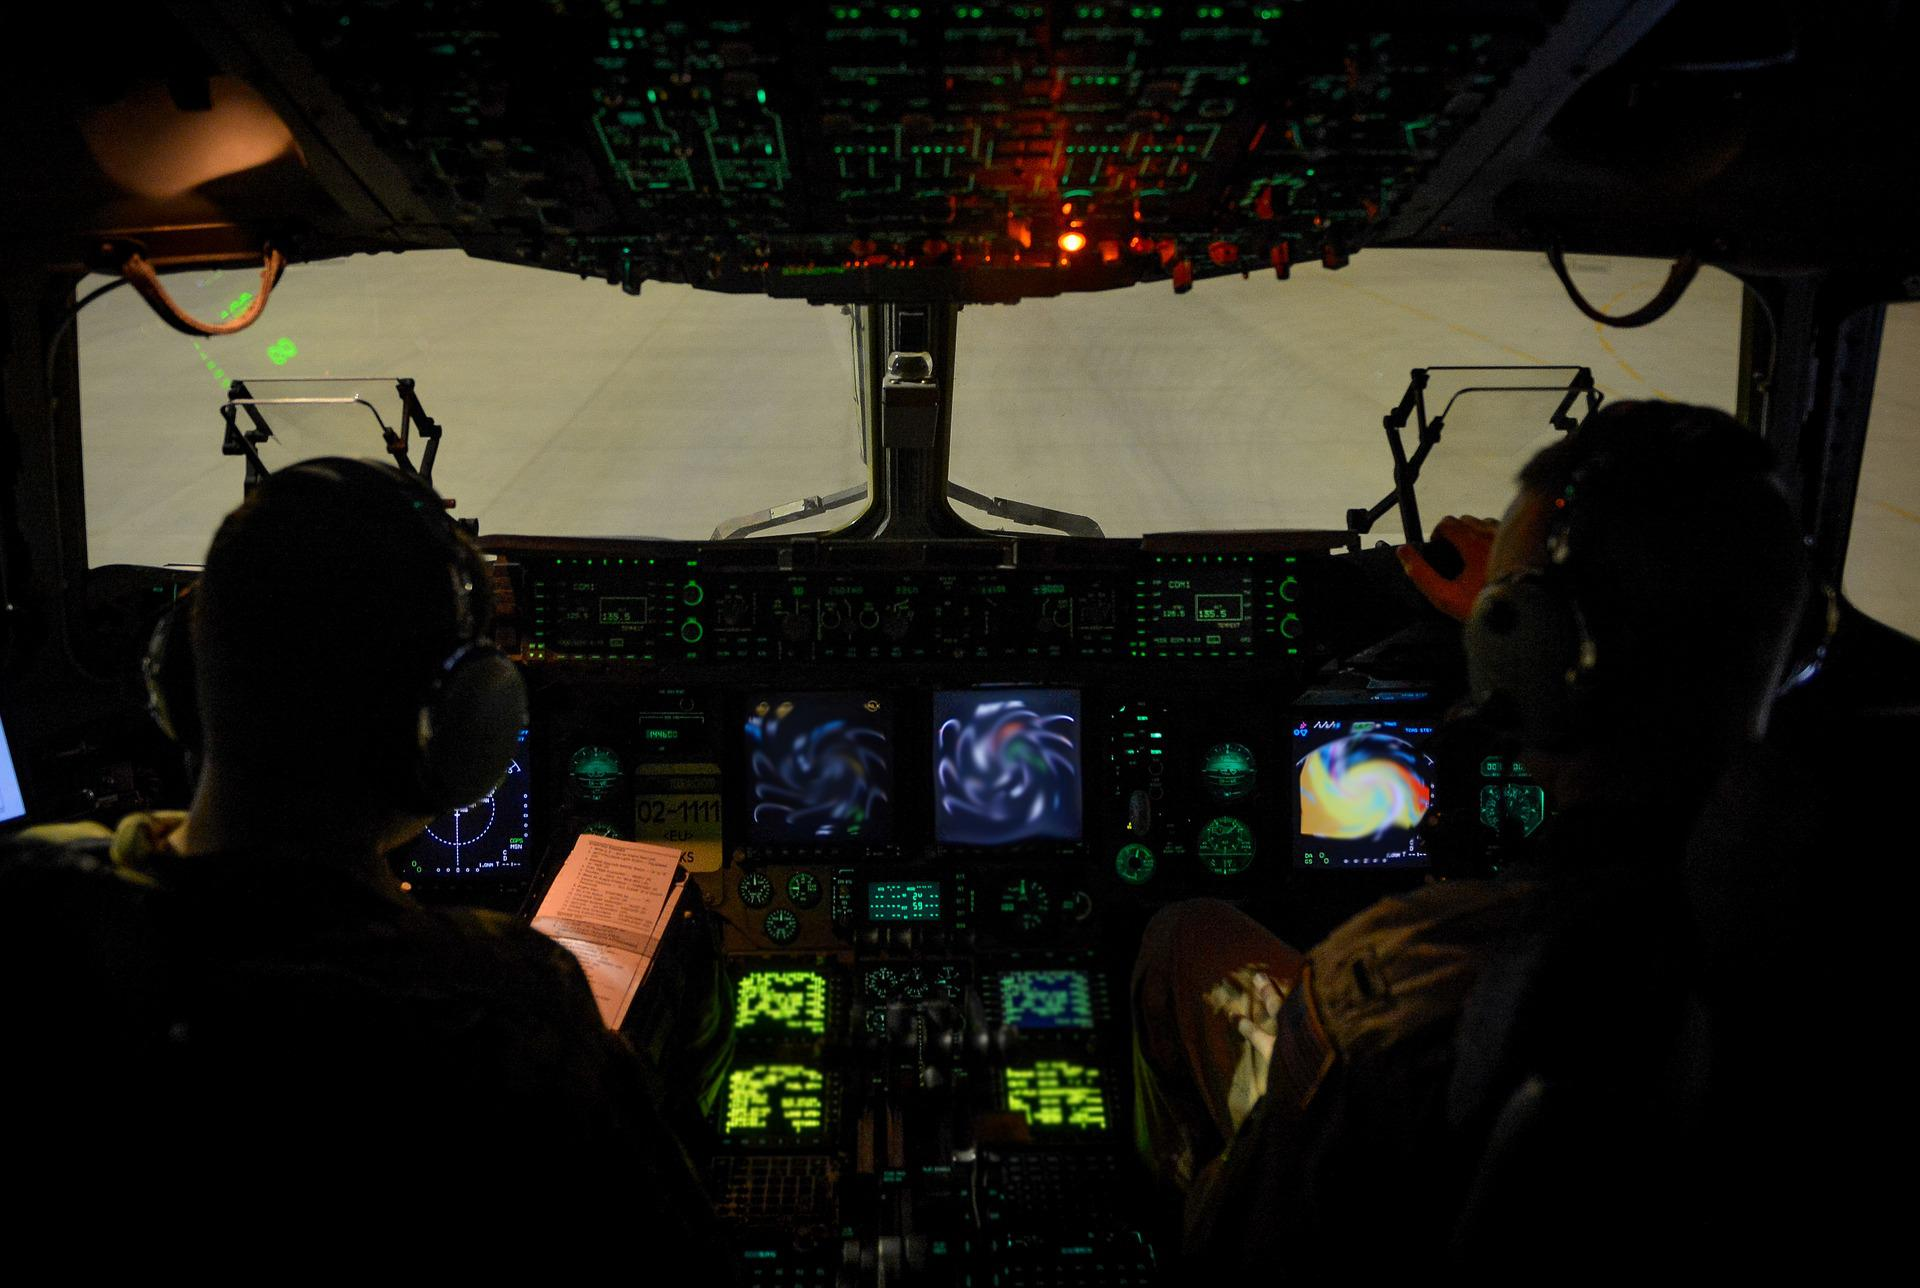 Two pilots preparing for a flight at night.